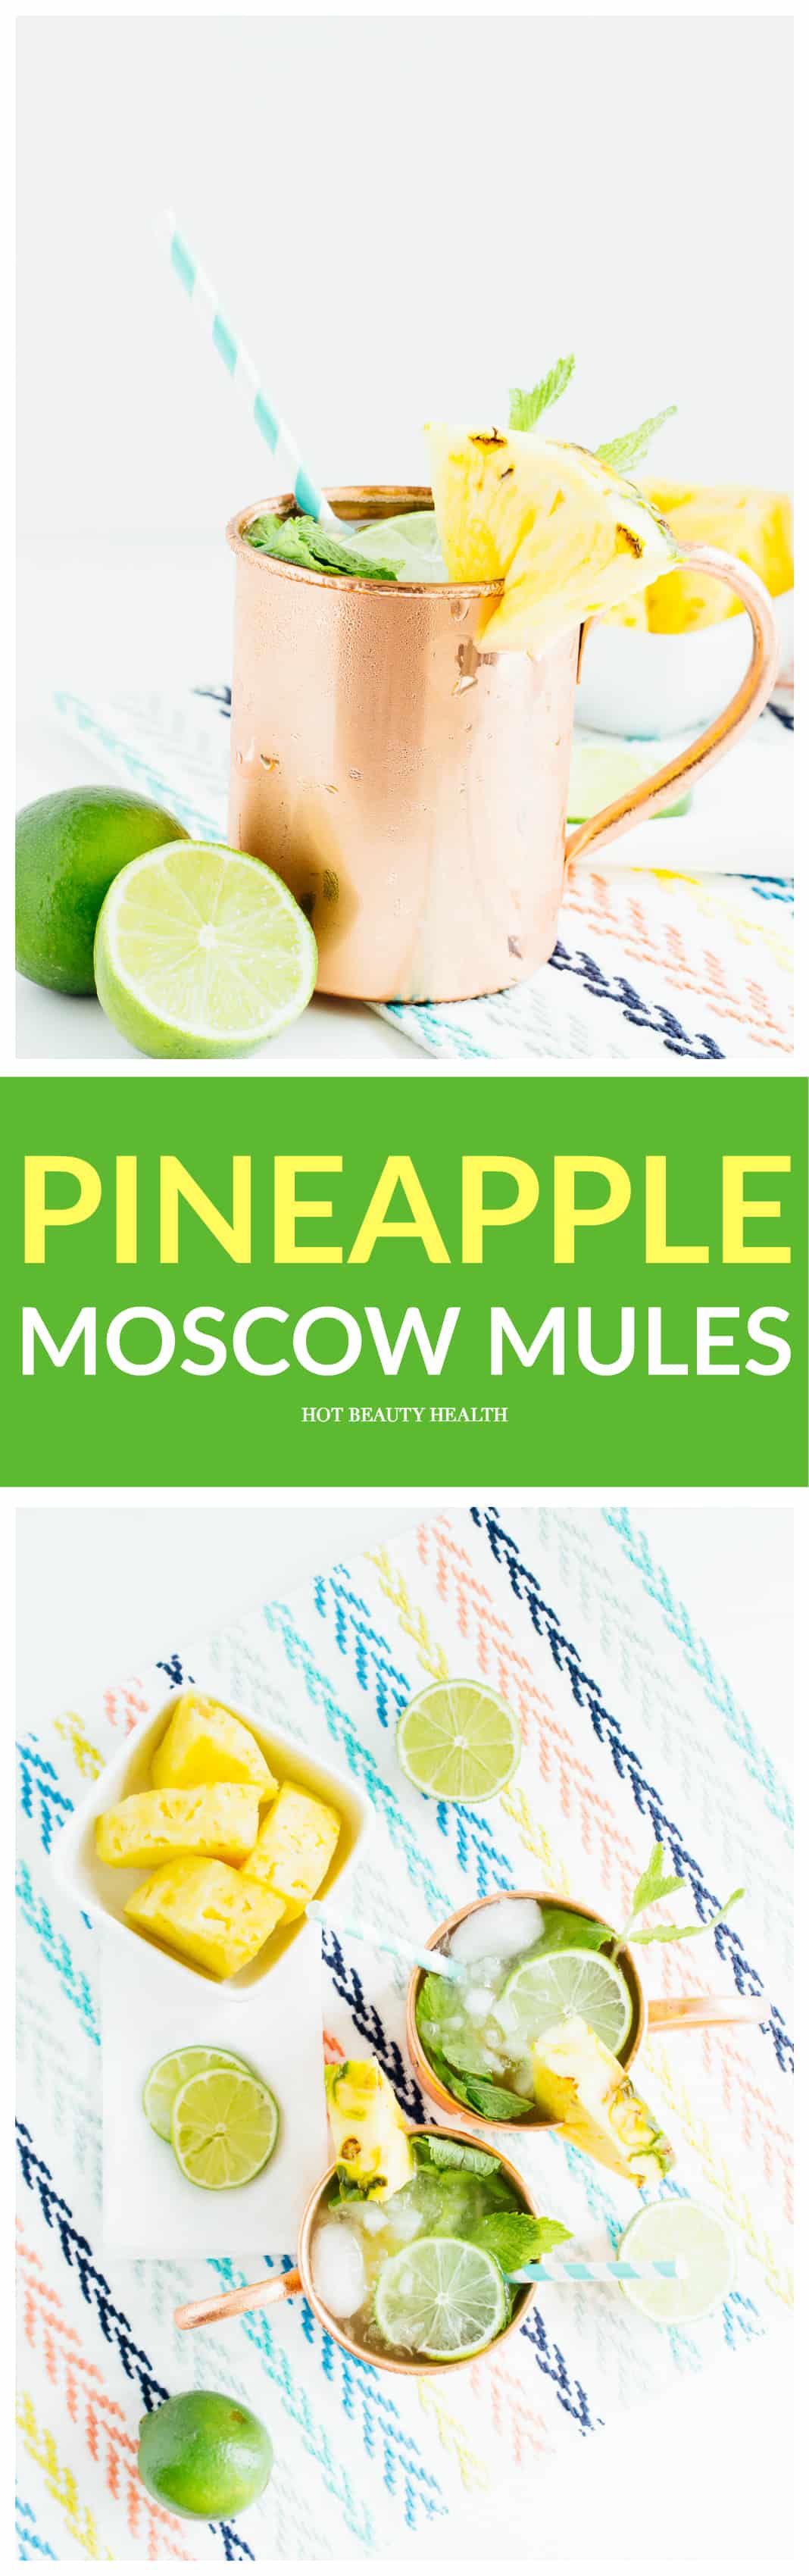 pineapple moscow mules pinterest